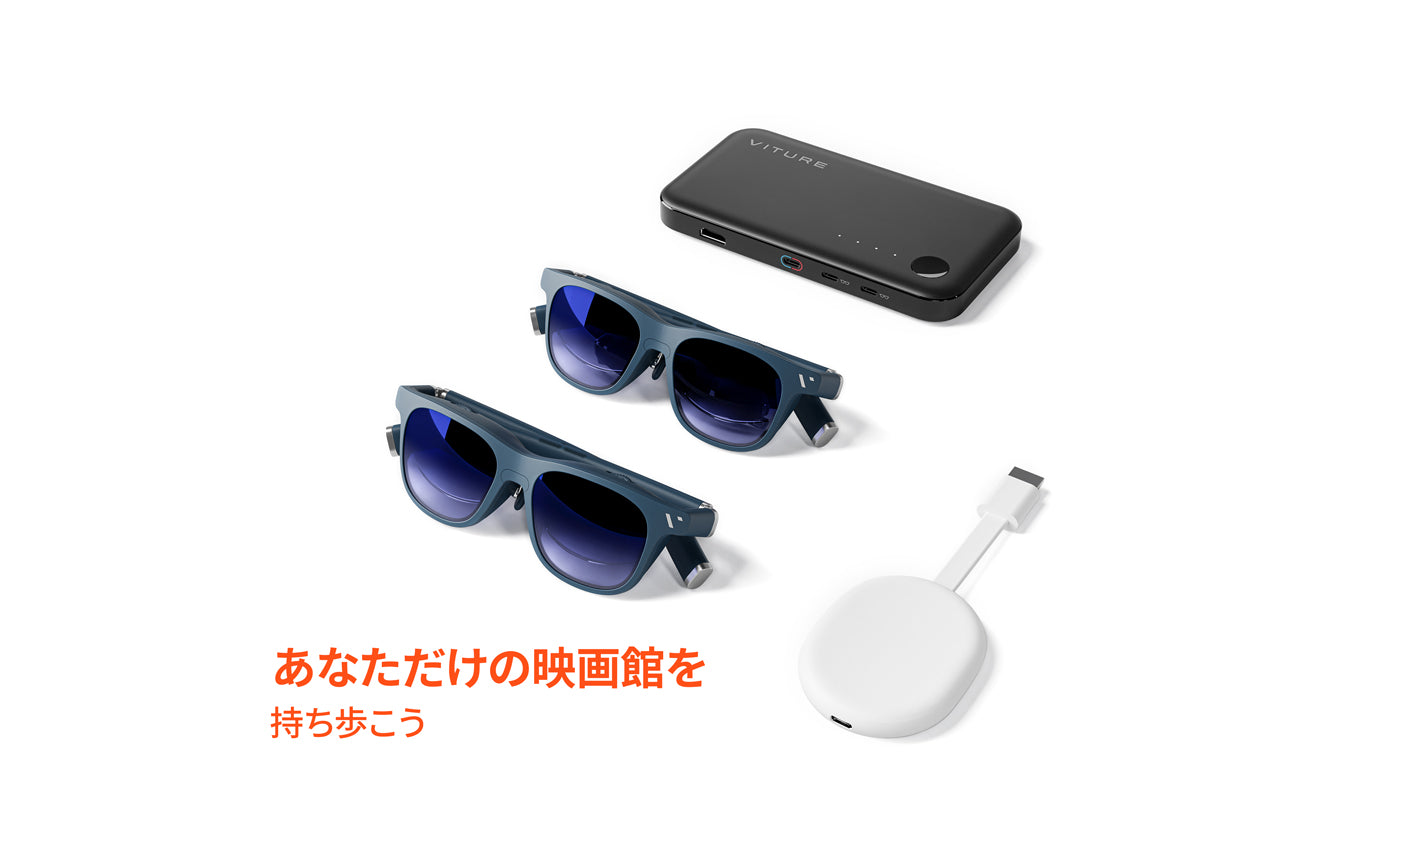 VITURE One Duo セット